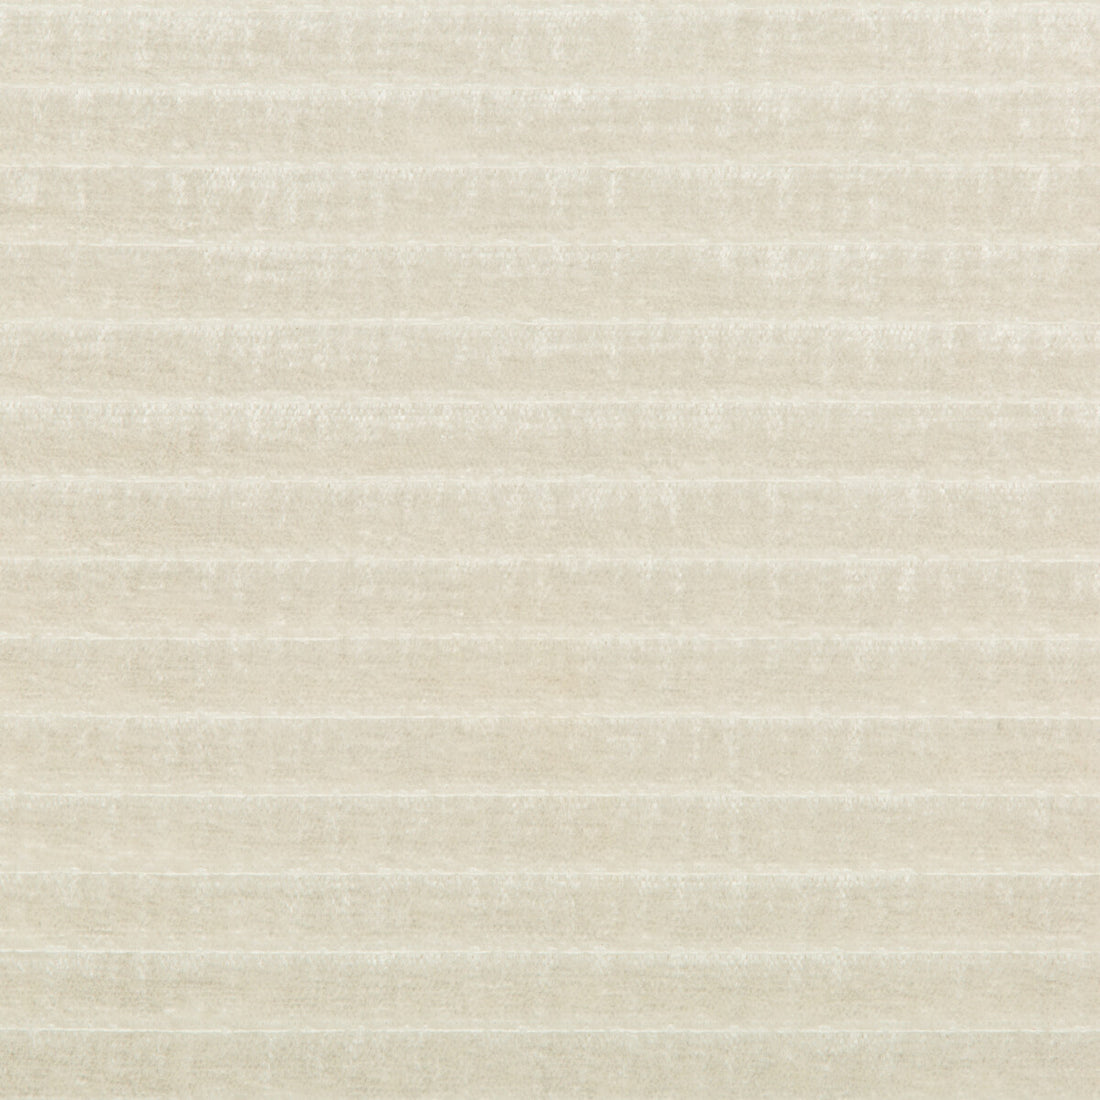 Kravet Smart fabric in 35780-1 color - pattern 35780.1.0 - by Kravet Smart in the Performance collection